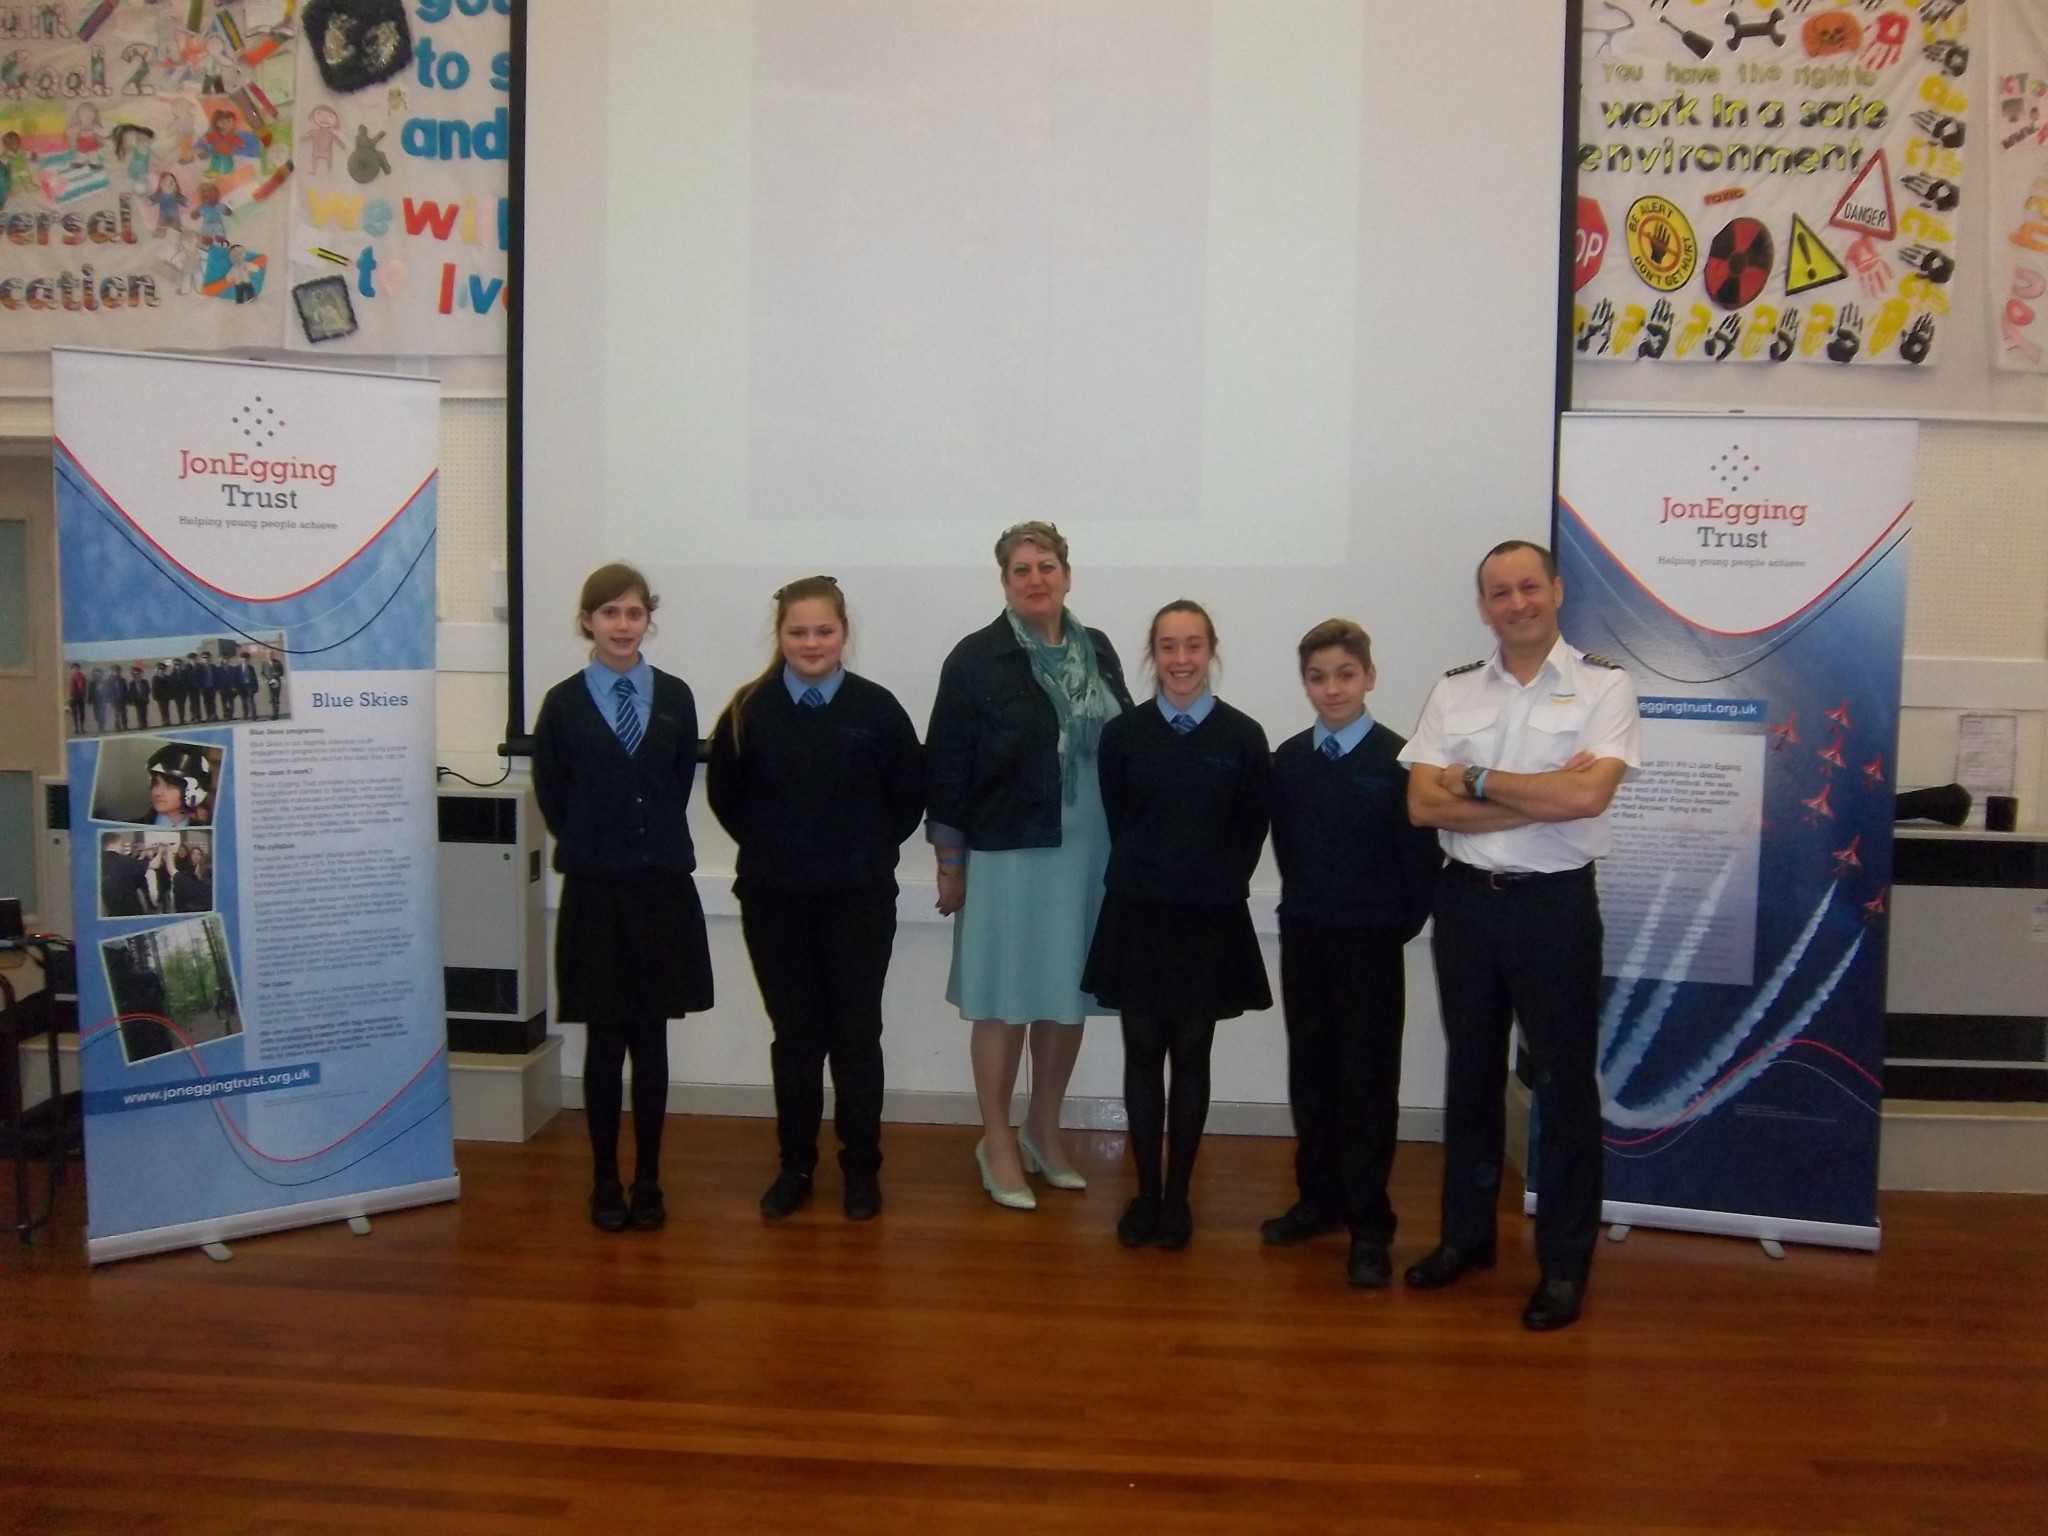 Inspirational Mentors lead assemblies at two Bournemouth schools